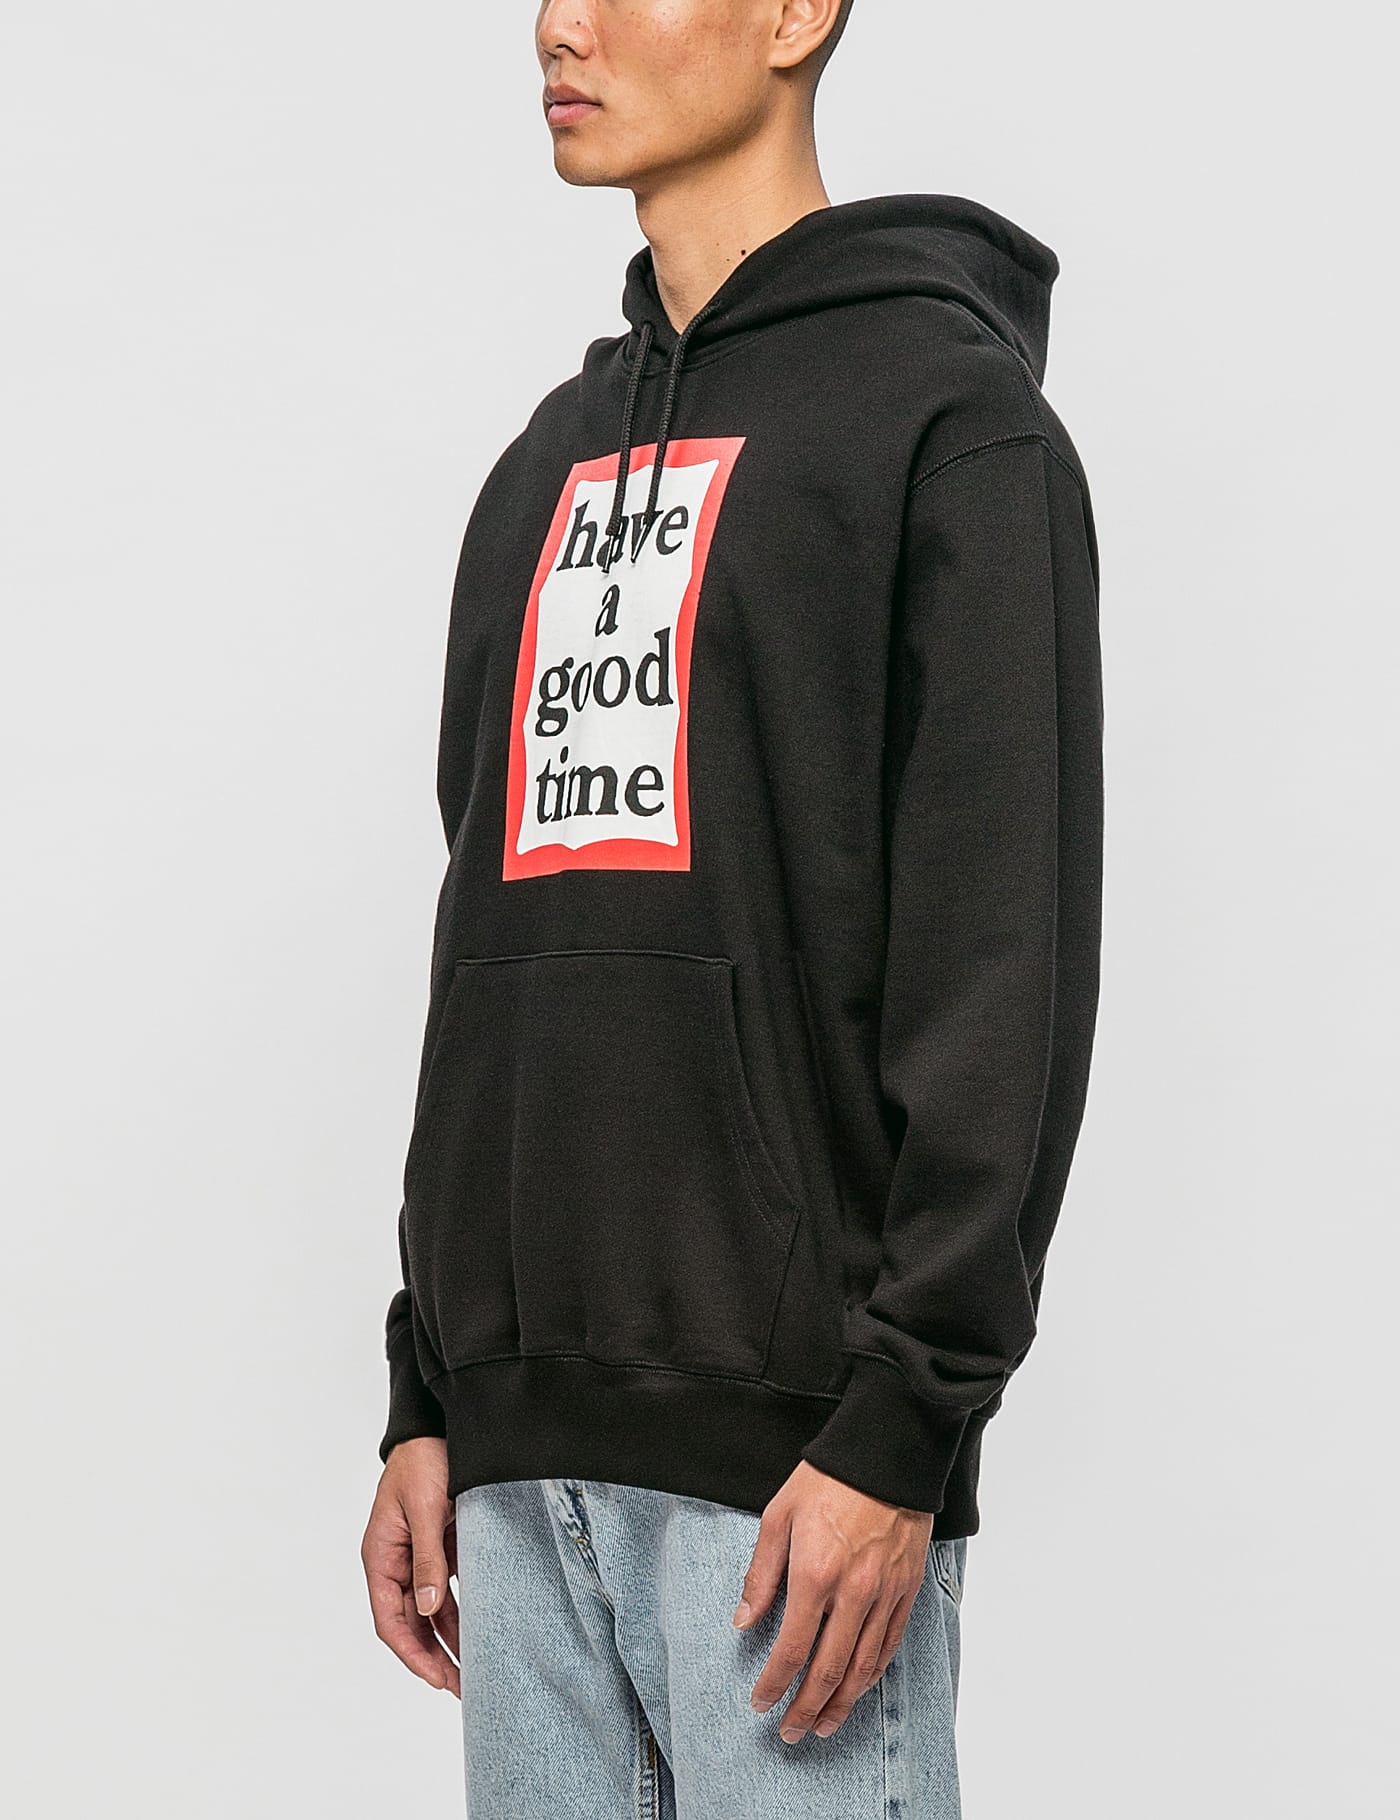 Have A Good Time - Frame Hoodie | HBX - Globally Curated Fashion